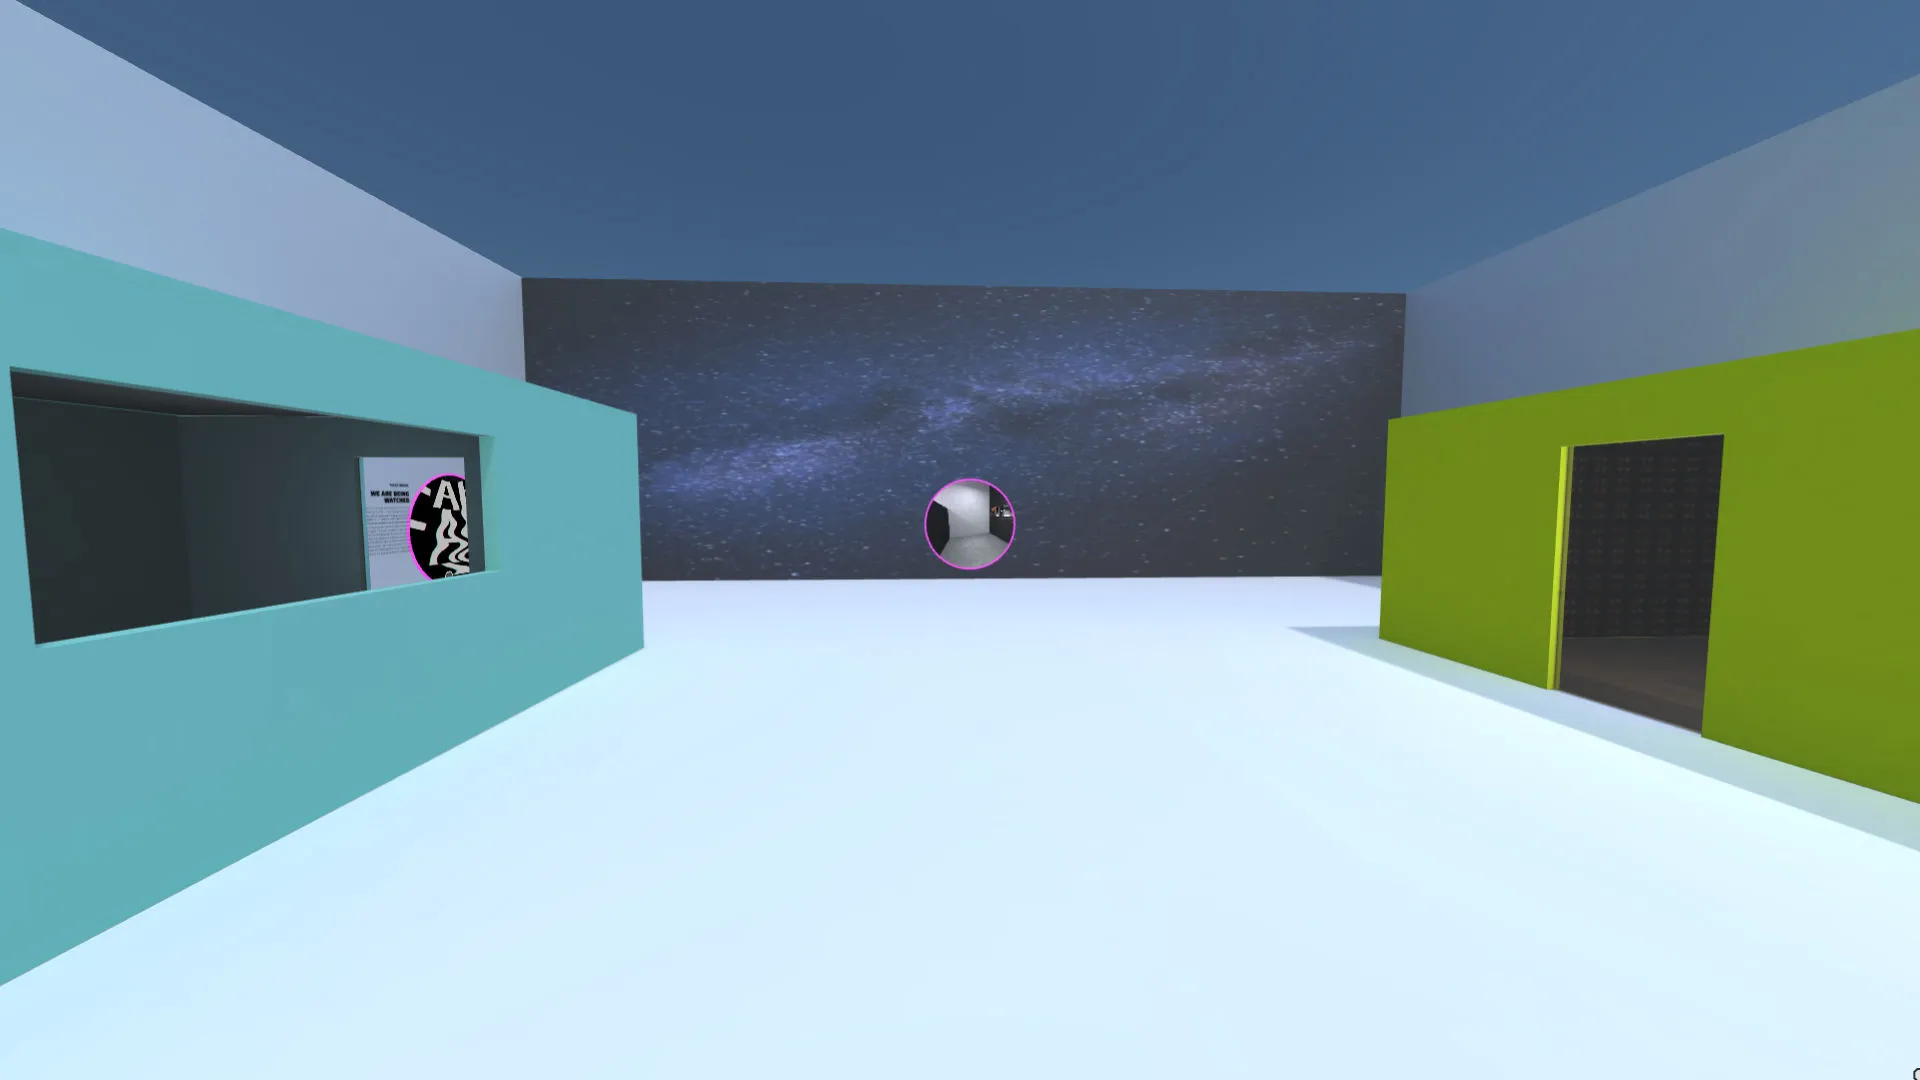 An image of a scene in the metaverse that shows 3 walls and two rooms, in the walls you can see portals for the other metaverse rooms